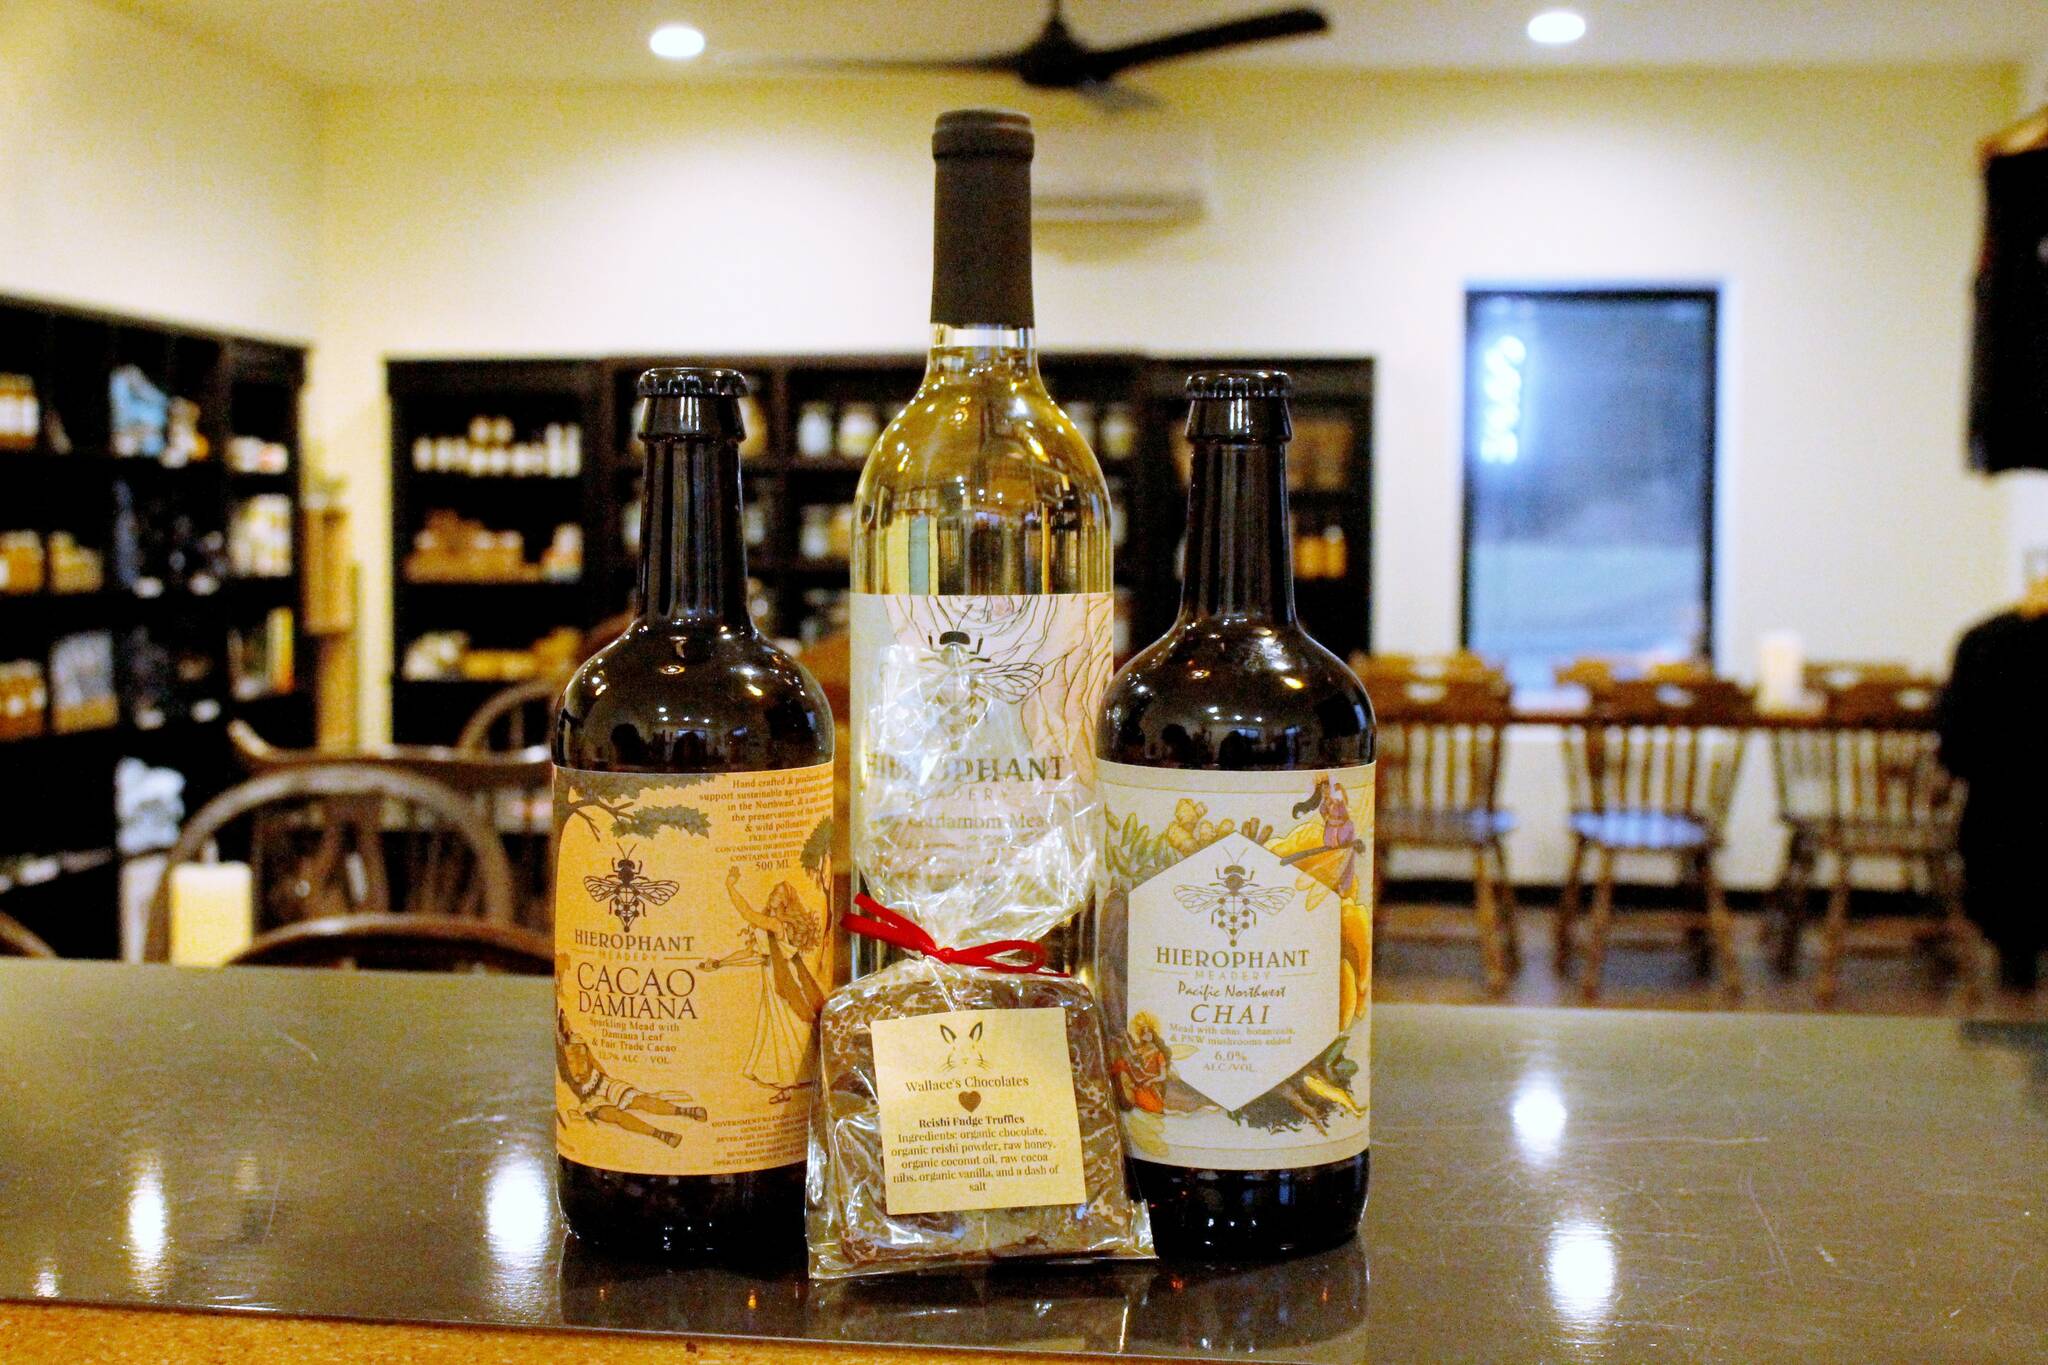 (Photo by Kira Erickson/South Whidbey Record) Cacao Damiana, Rose Cardamom and Pacific Northwest Chai are just a few flavors of mead currently being highlighted at Hierophant Meadery, a new stop on the Red Wine and Chocolates Tour this year.